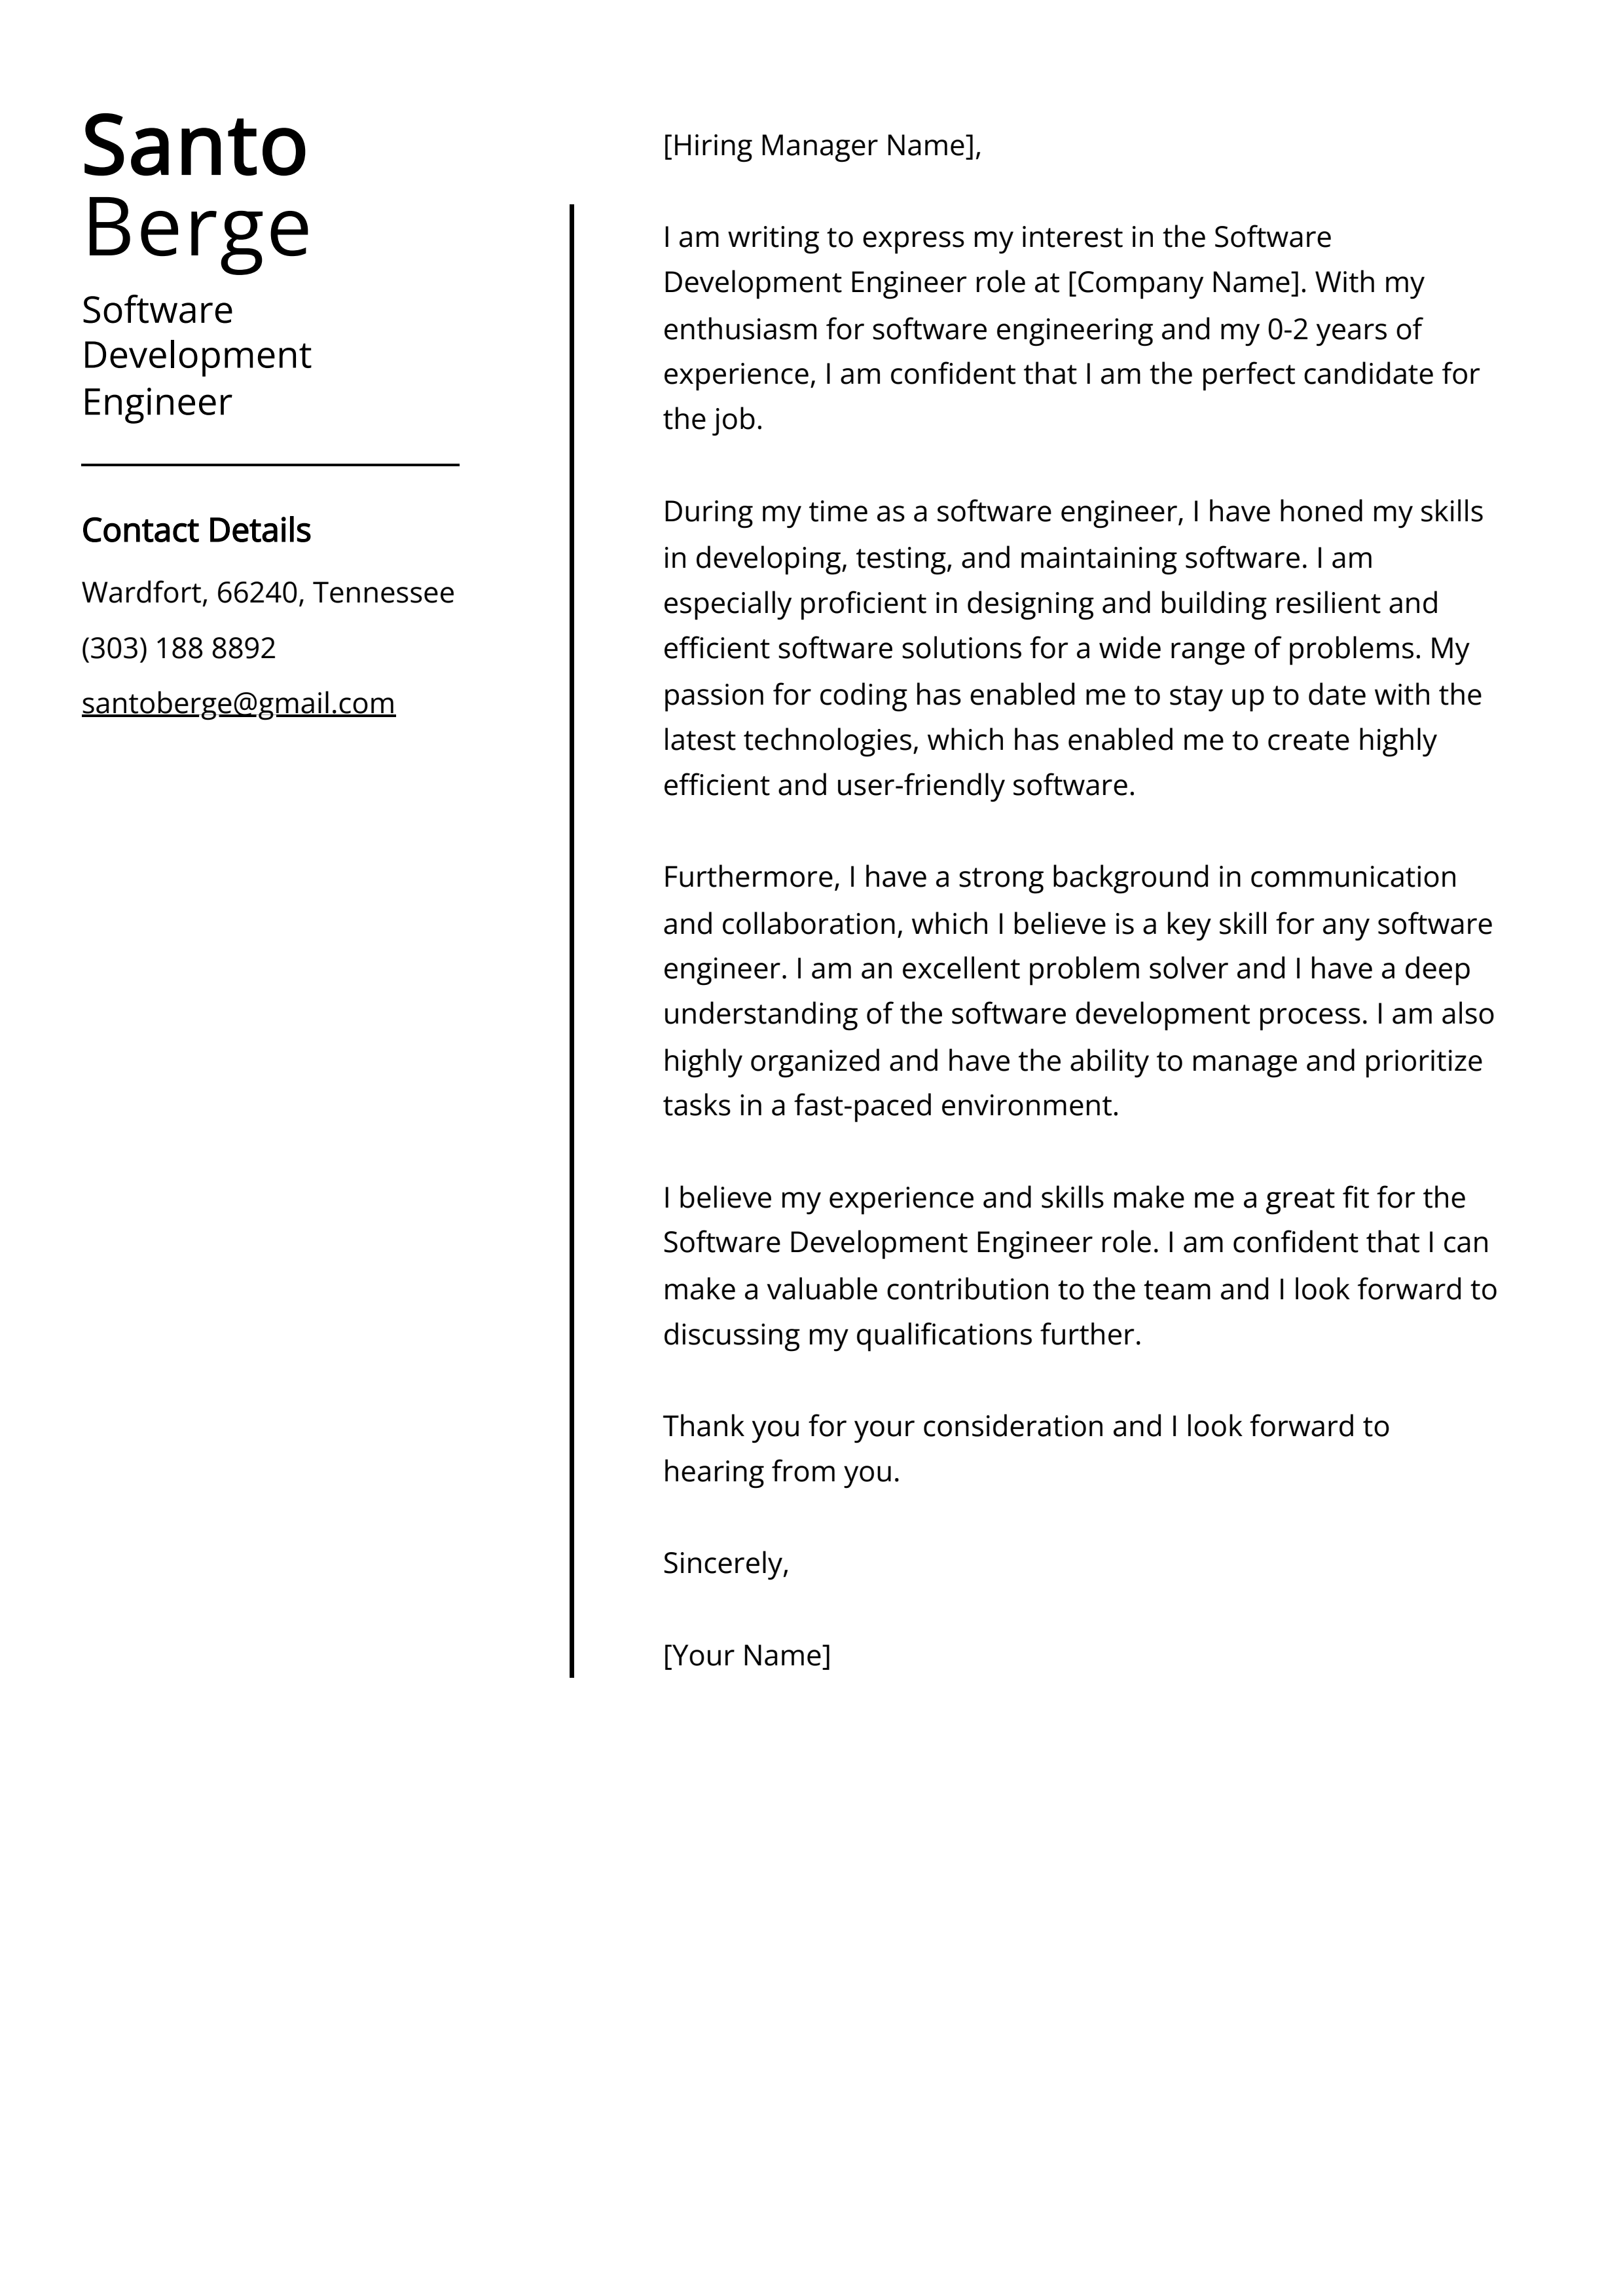 Software Development Engineer Cover Letter Example